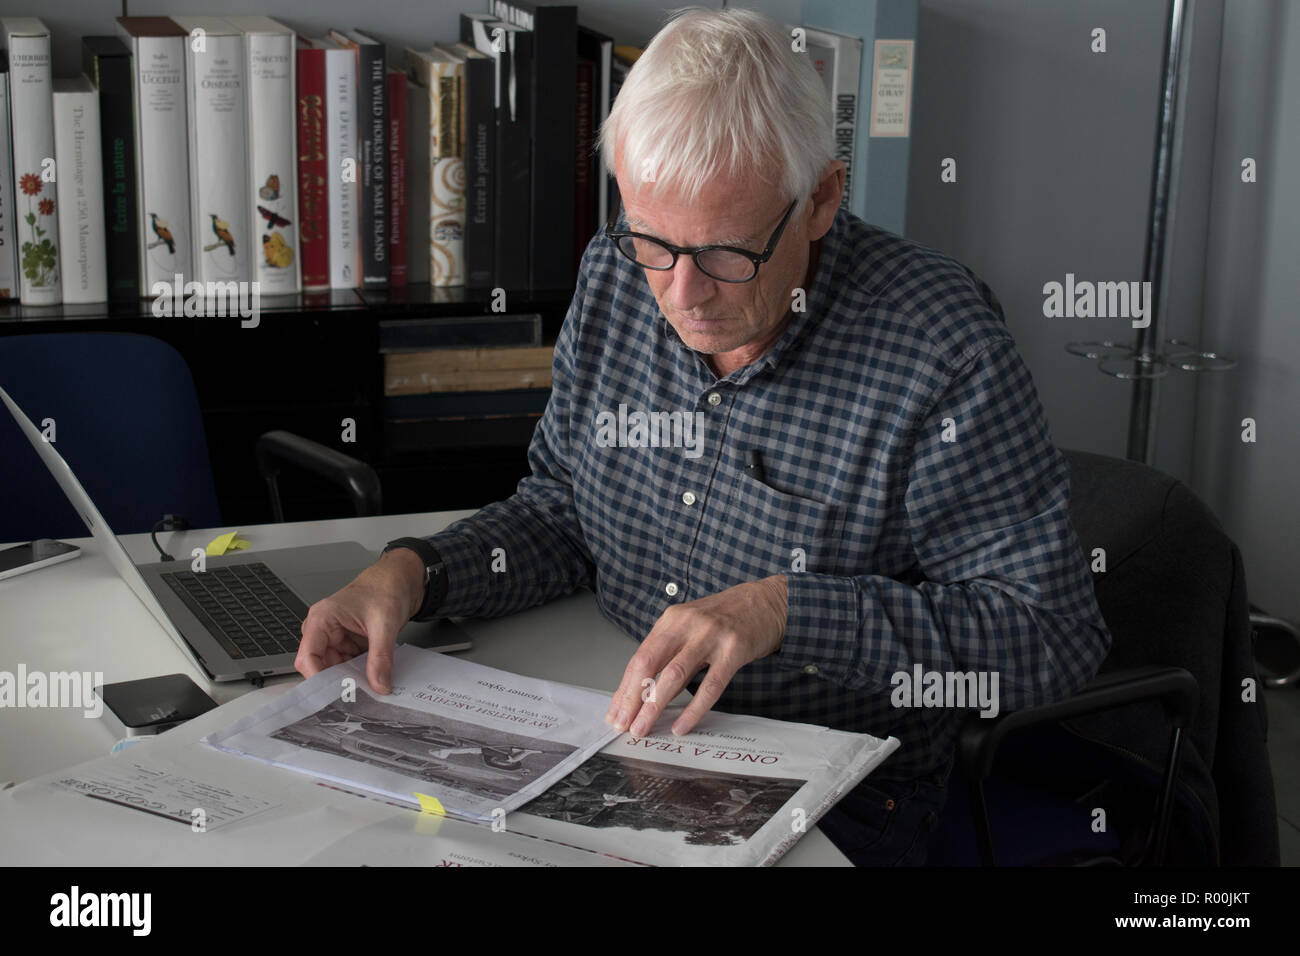 Dewi Lewis British photography book publisher on press publishing My British Archive, The Way We Were 1968-1983 at EBS Verona Italy. 2018 HOMER SYKES Stock Photo